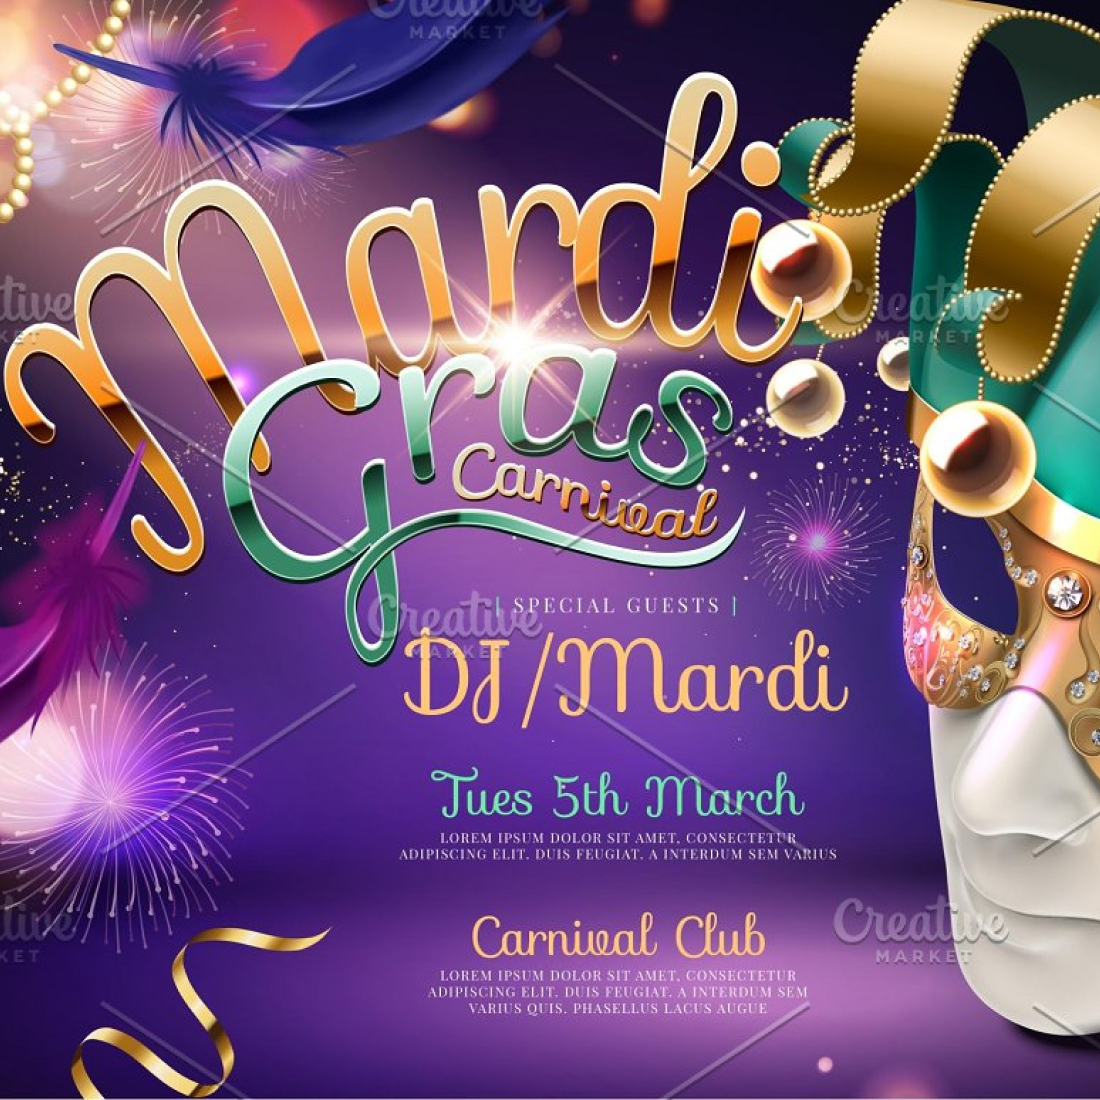 Images with mardi gras carnival design.